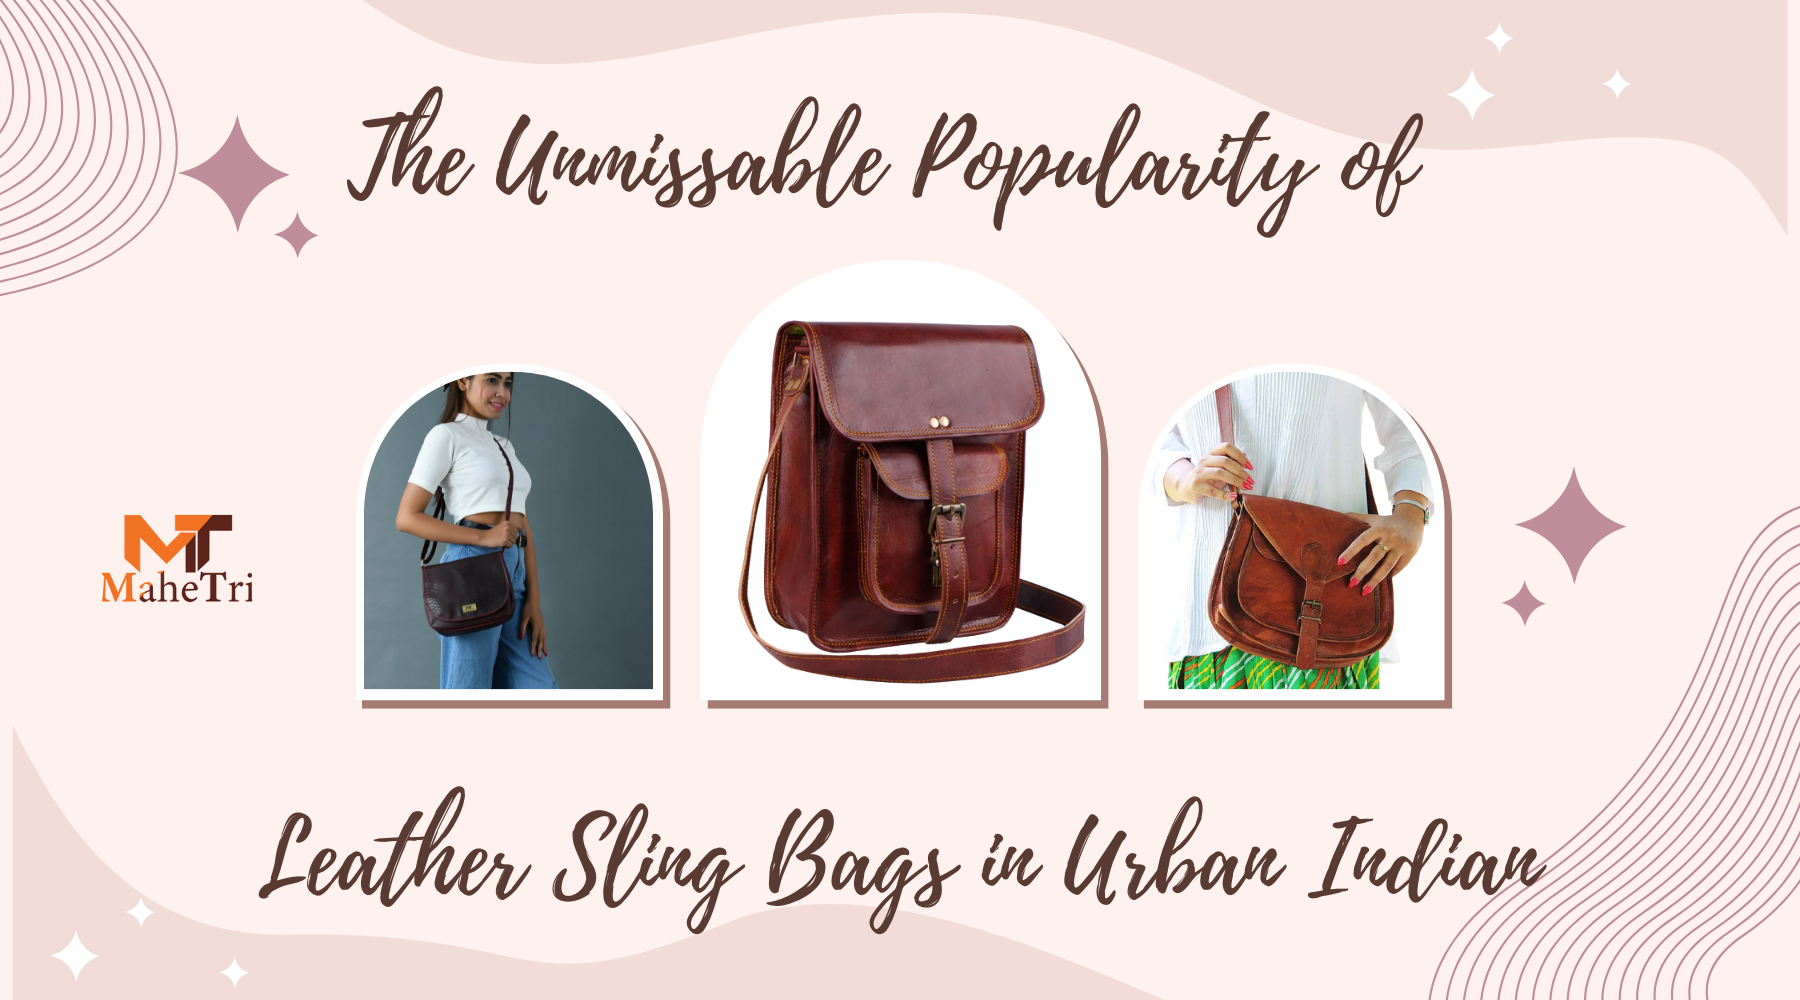 The Unmissable Popularity of Leather Sling Bags in Urban Indian Fashion